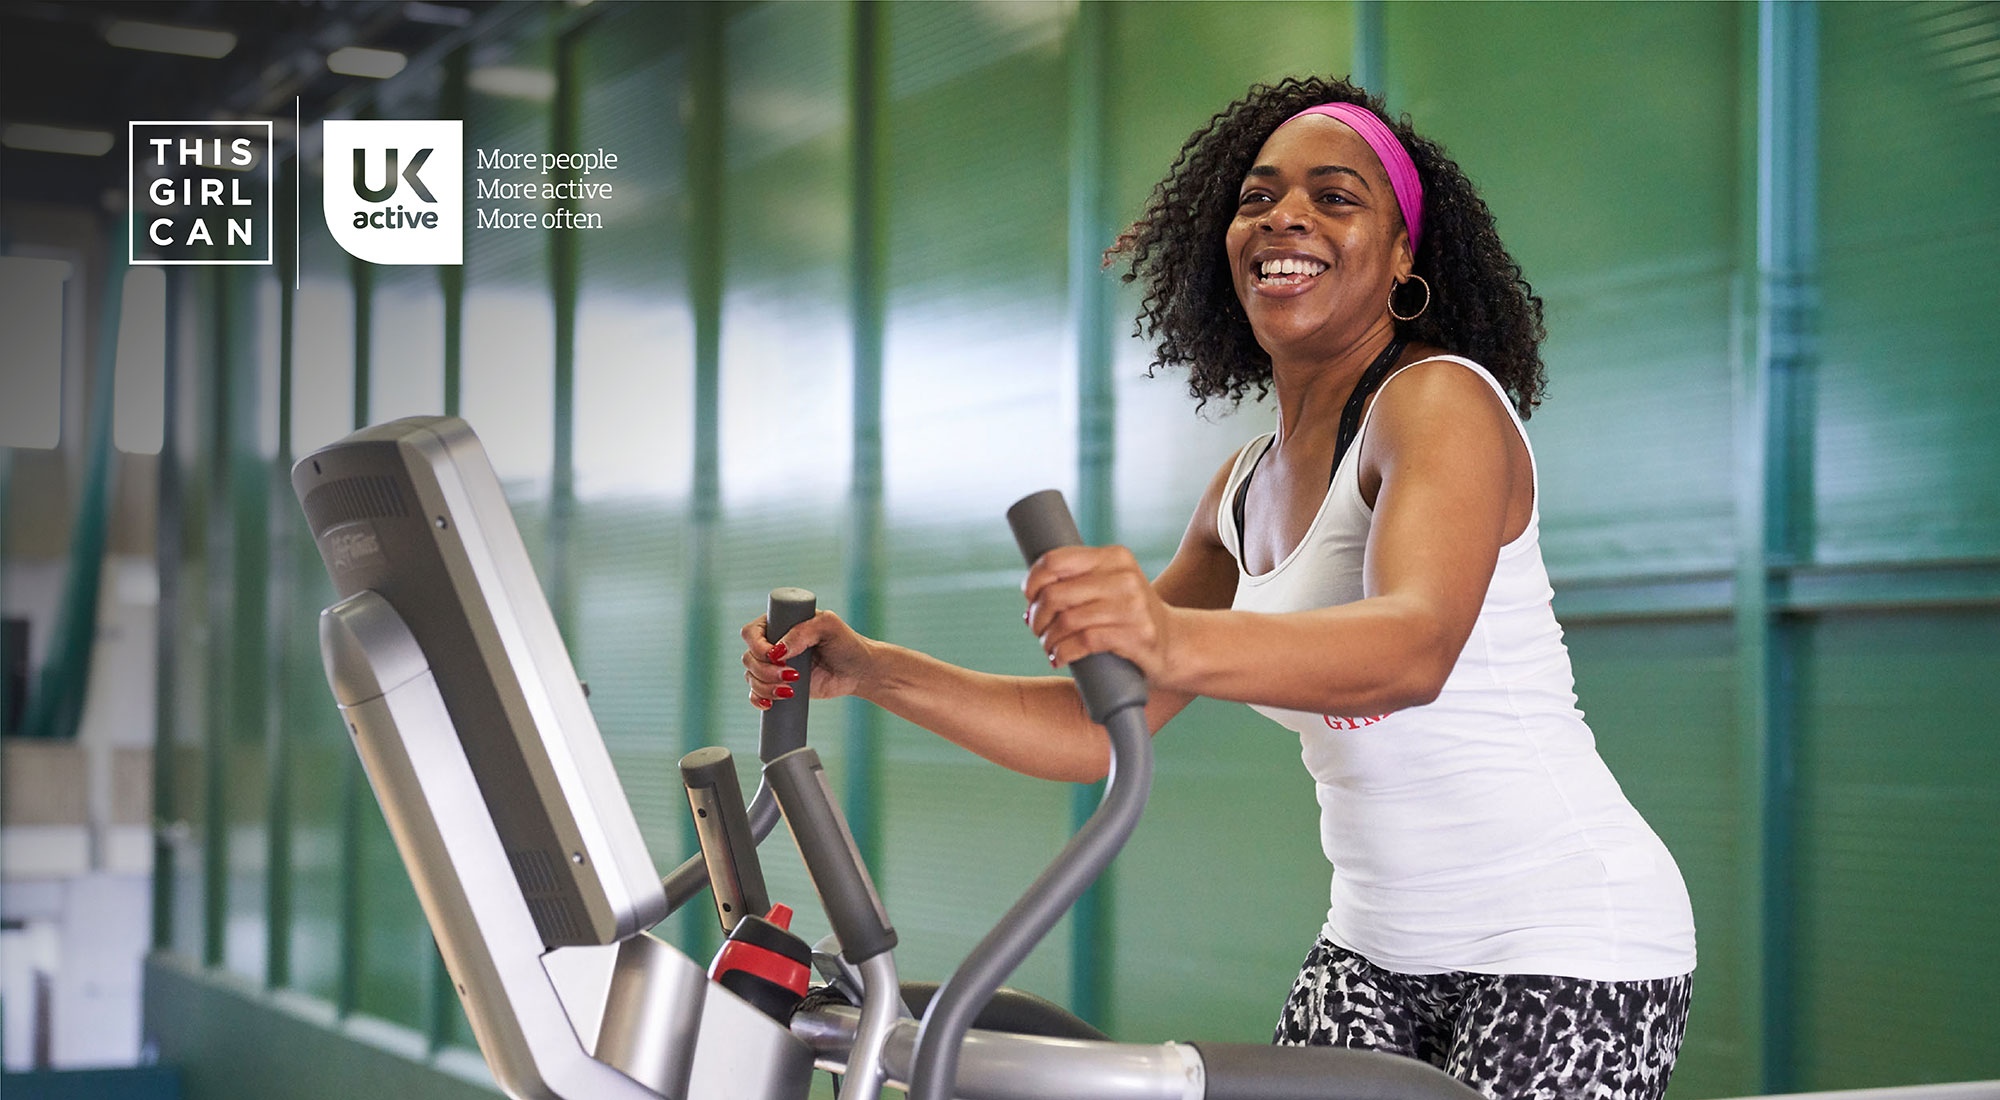 ukactive and This Girl Can launch practical guide for gyms and leisure centres to support more women and girls to be active